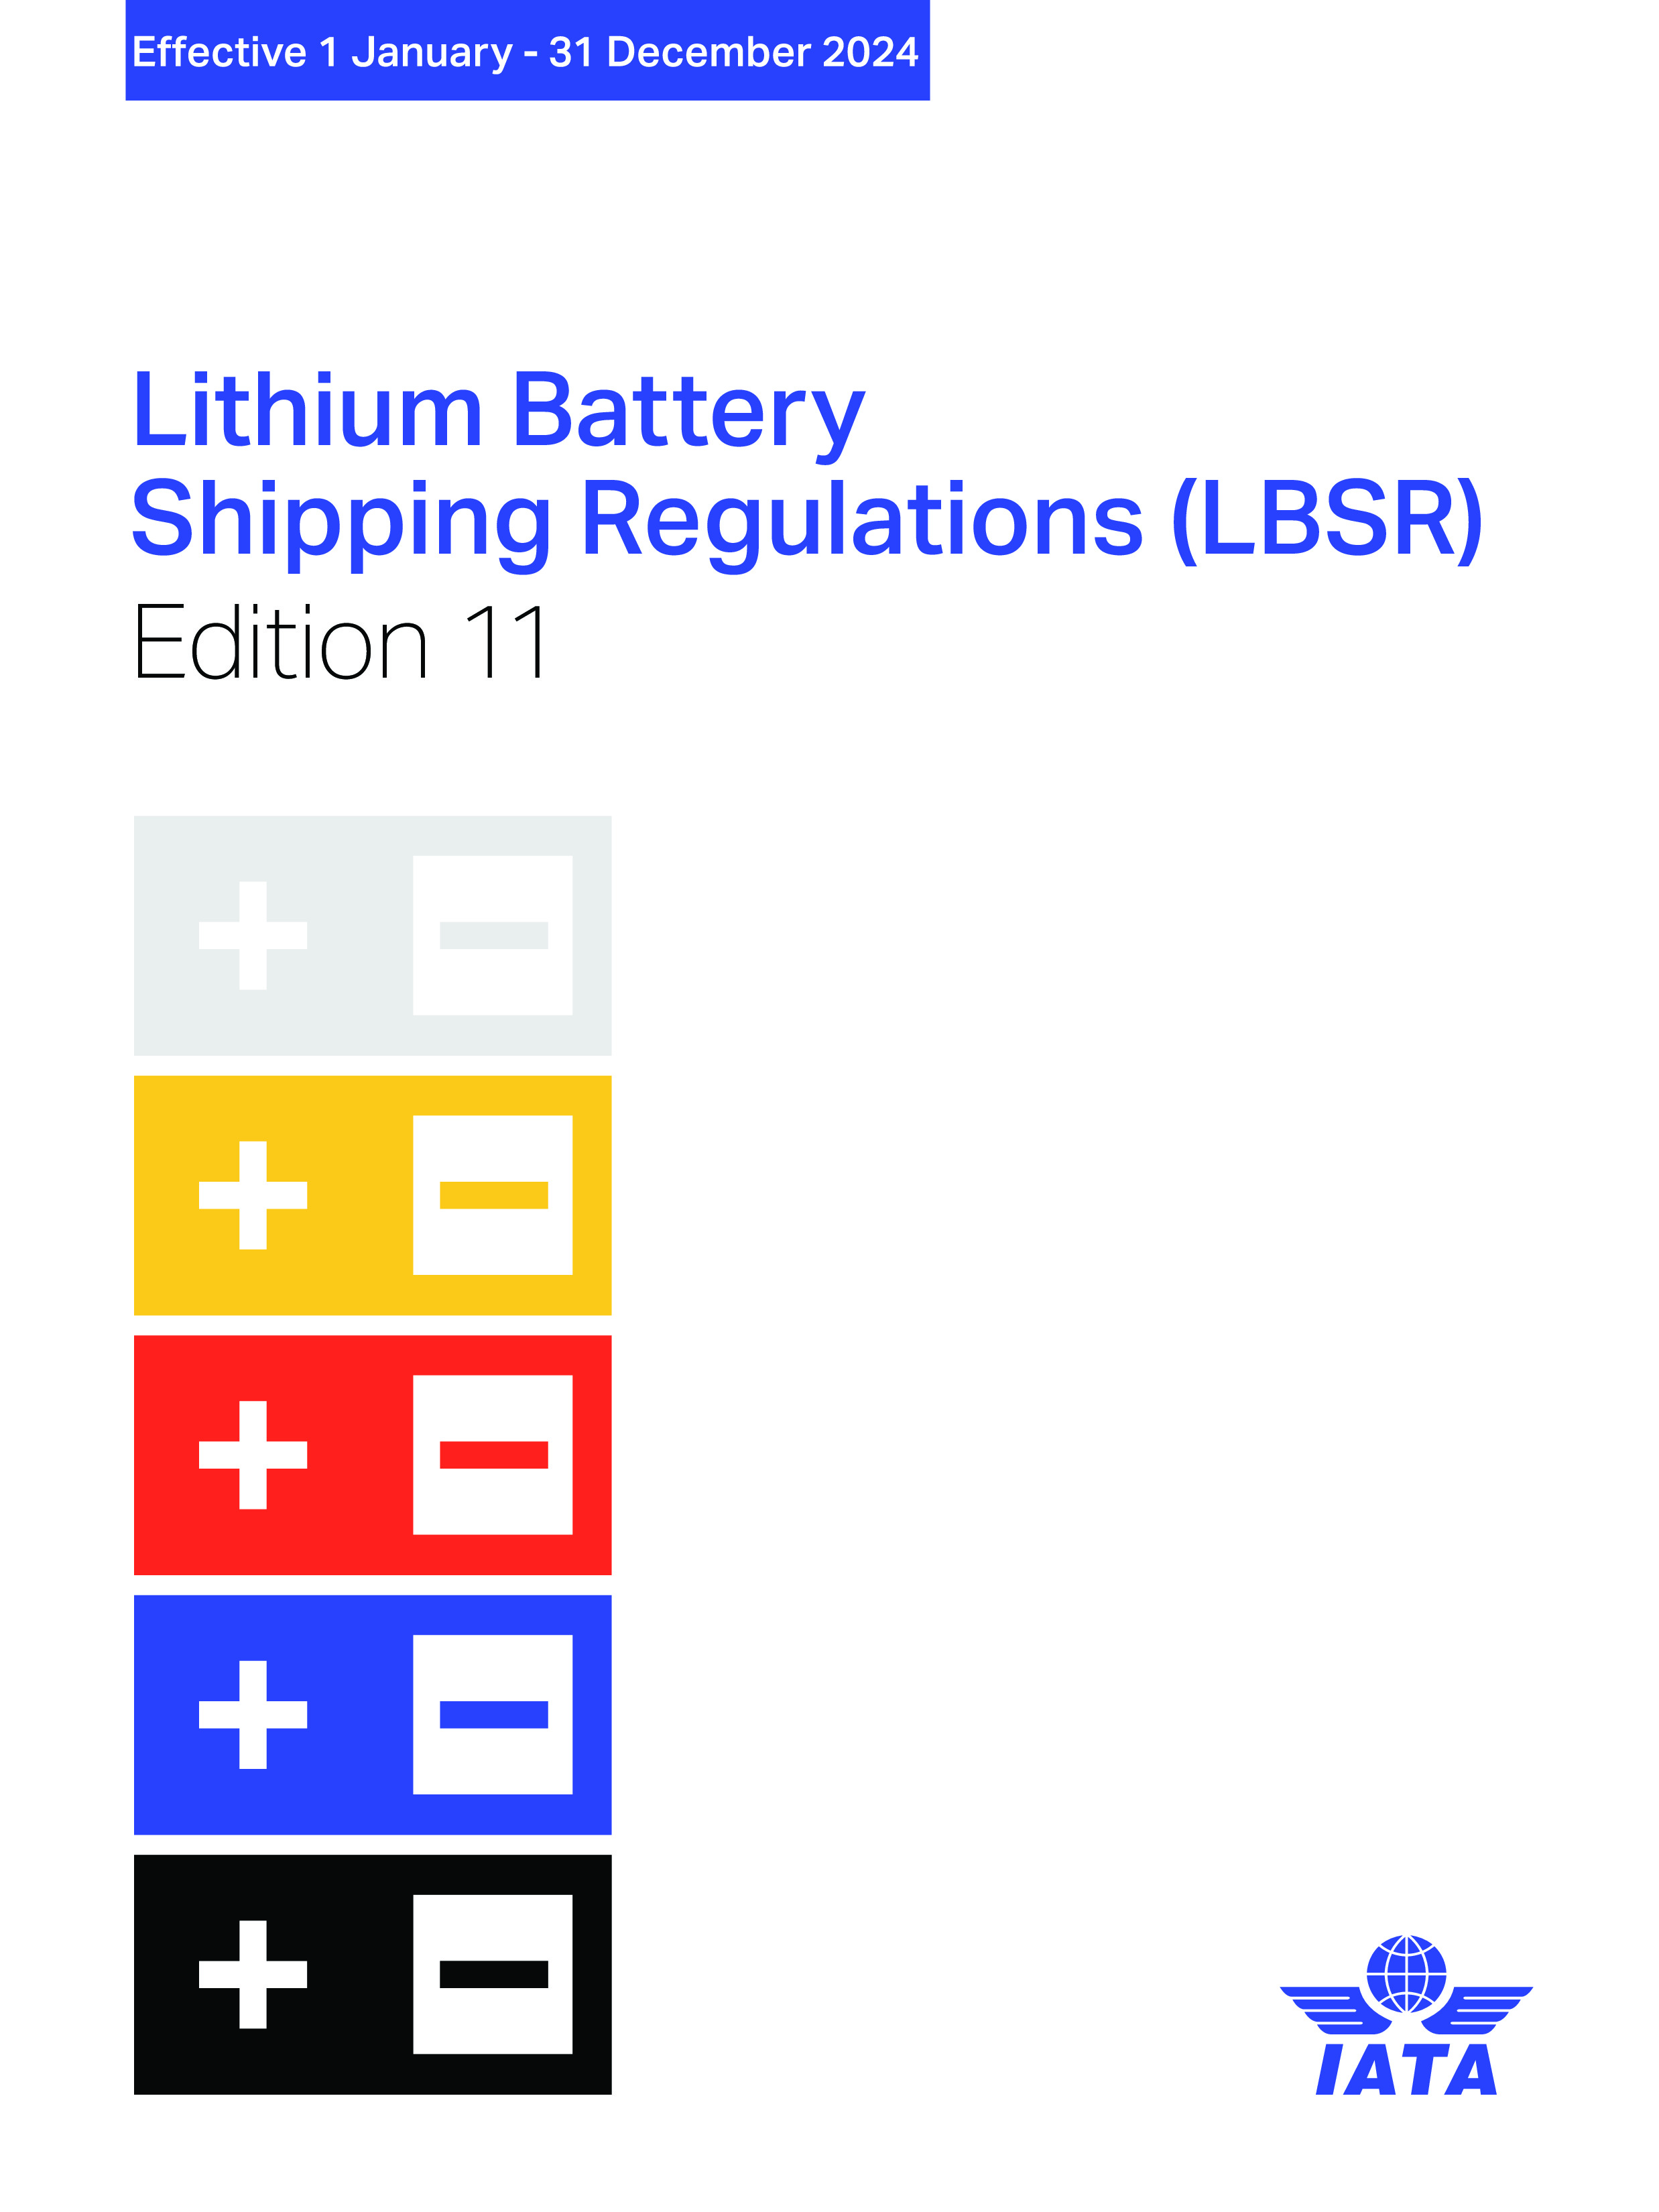 Lithium Battery Shipping Guidelines (Manual) 11th Edition